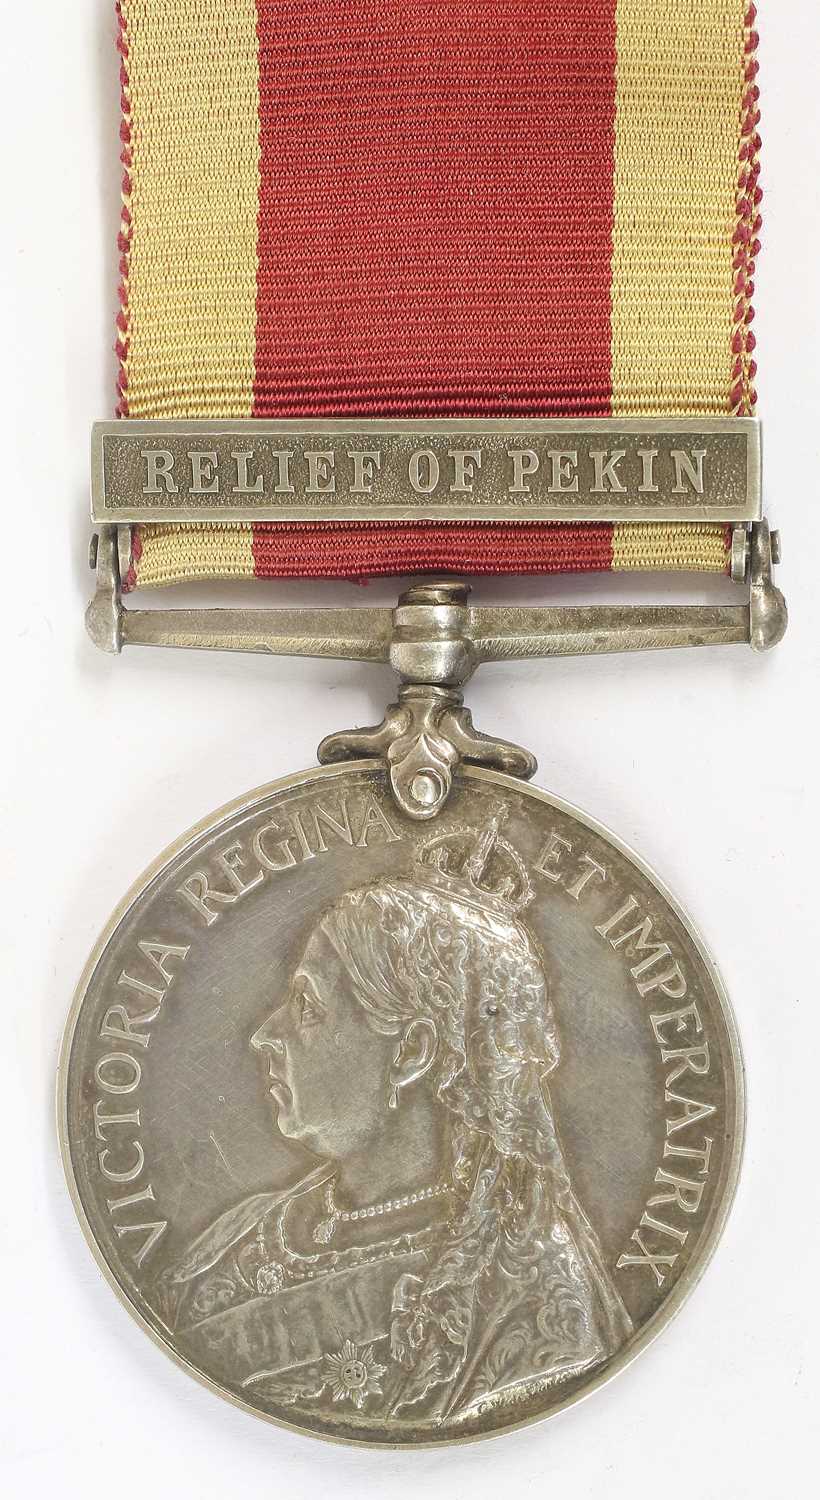 Lot 40 - A China War Medal 1900, with clasp RELIEF OF...